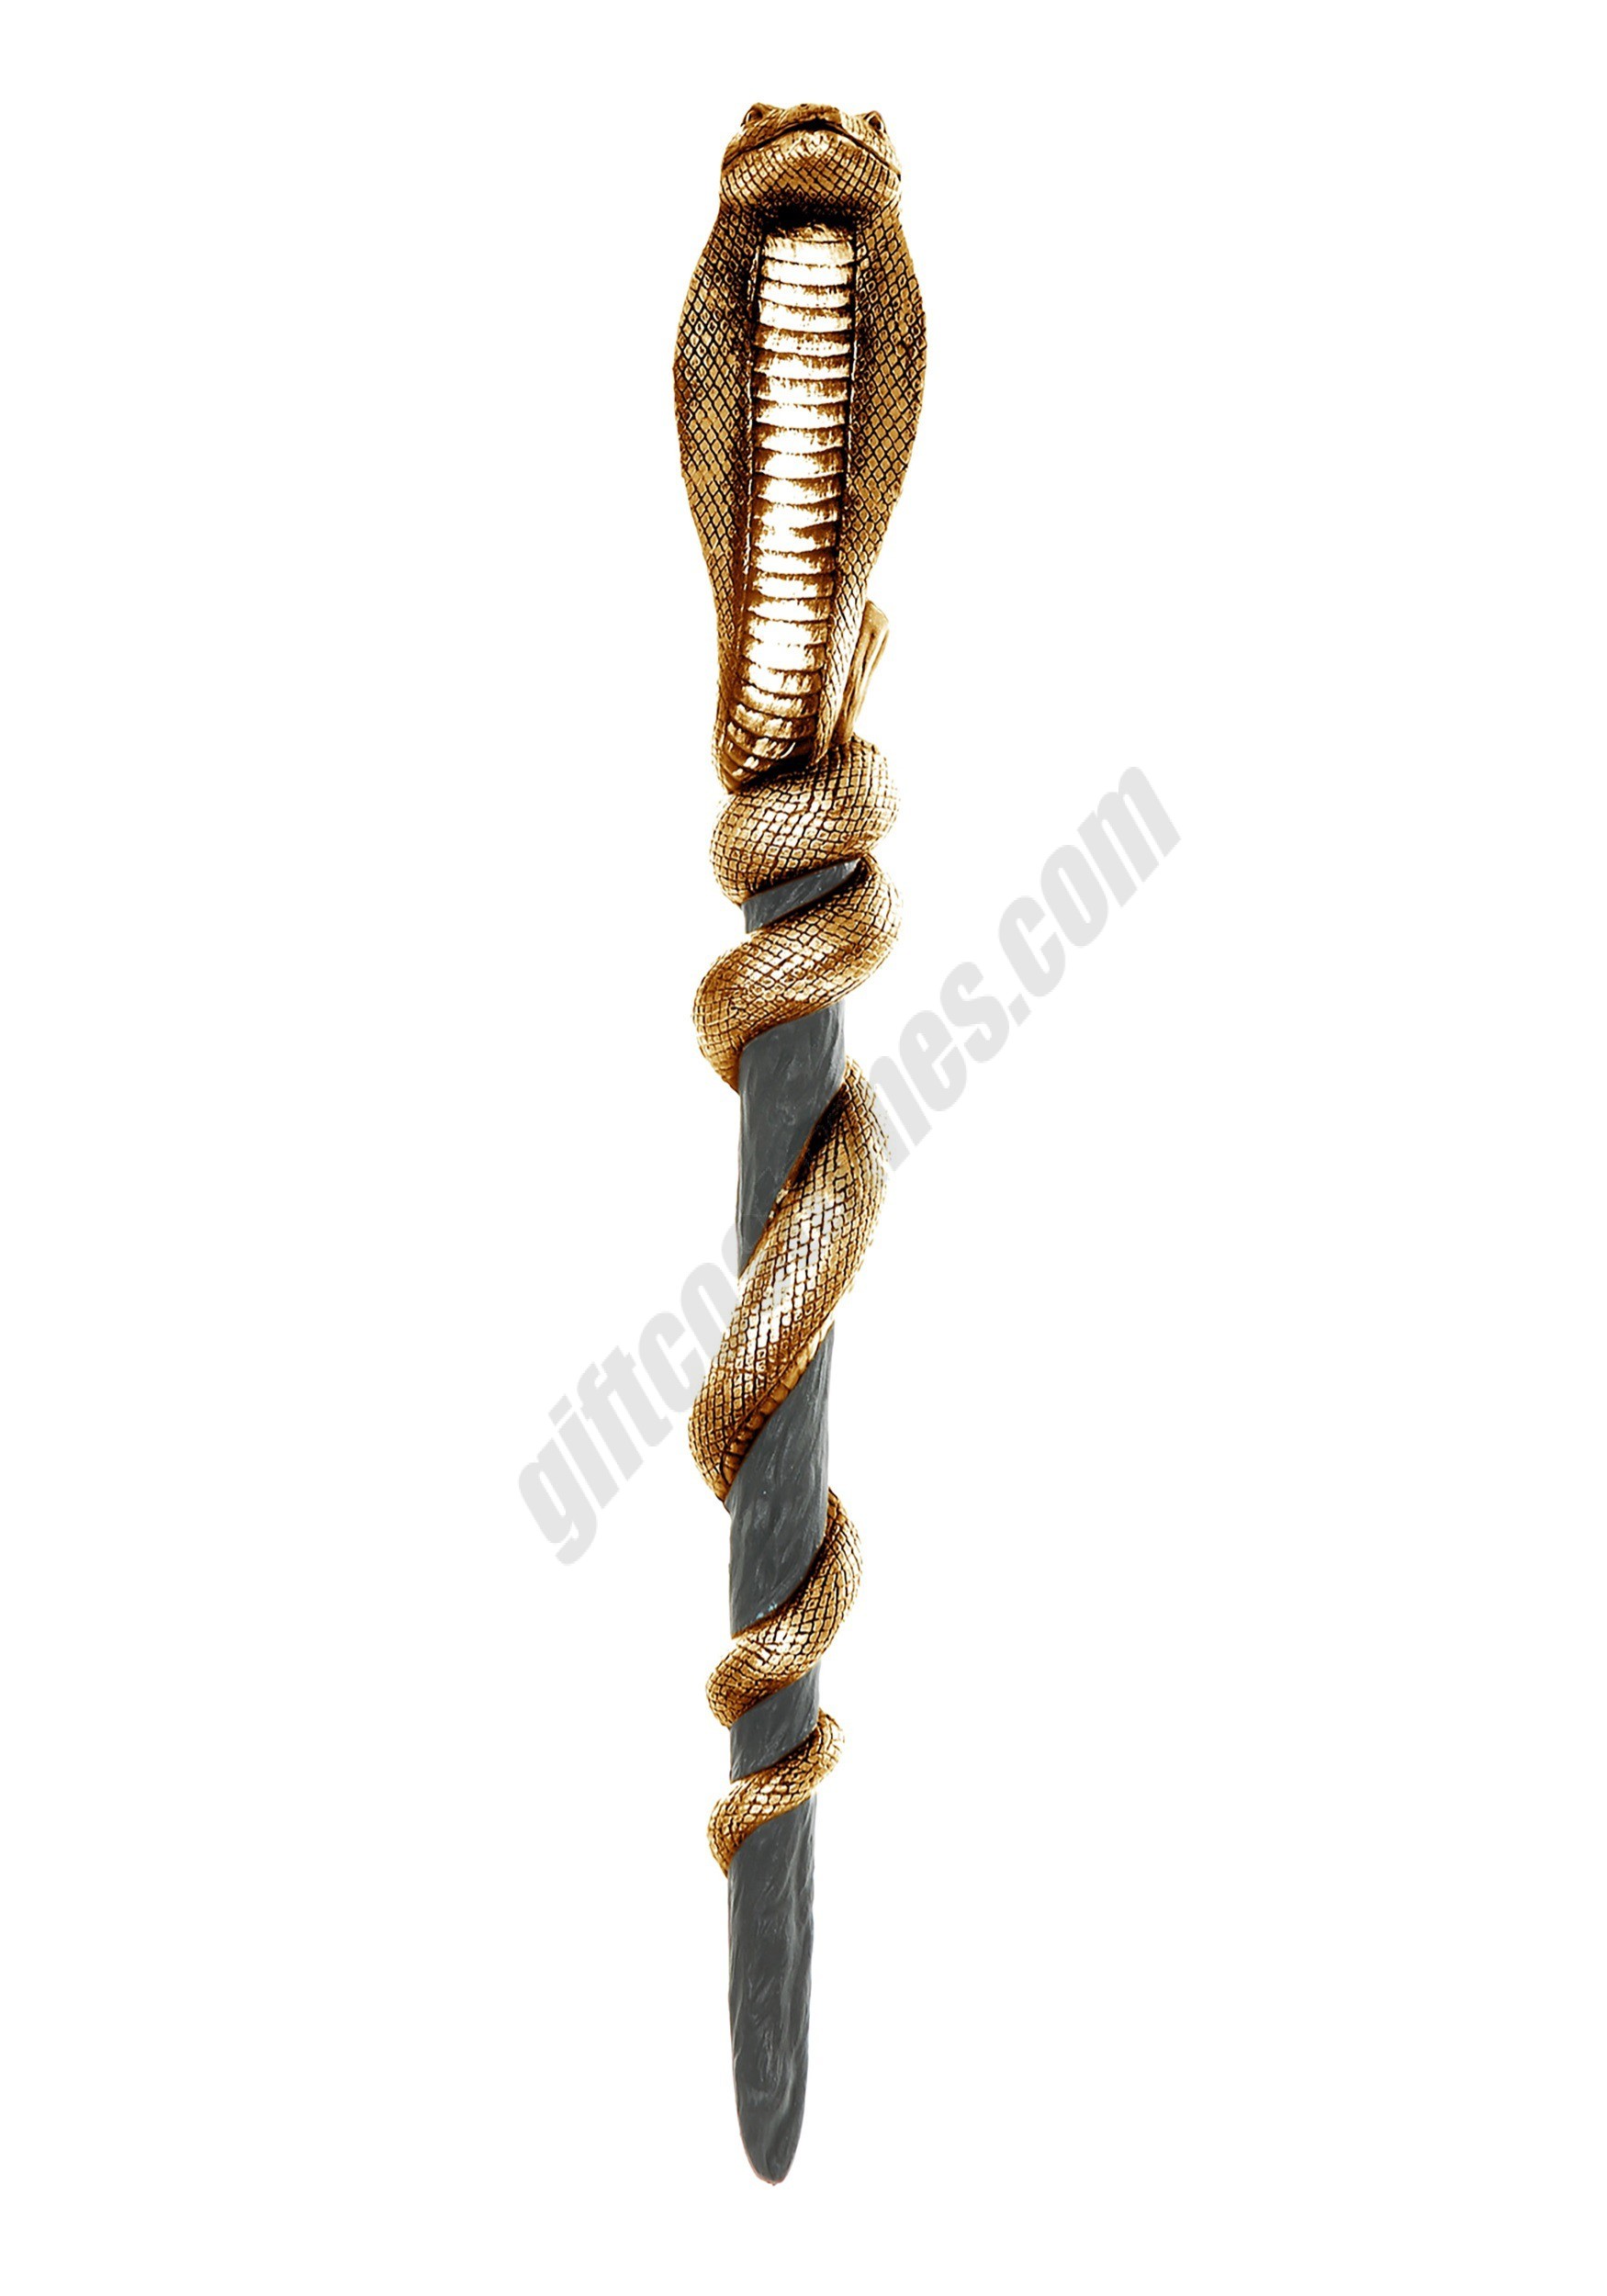 Egyptian Cobra 25 Inch Staff Promotions - Egyptian Cobra 25 Inch Staff Promotions